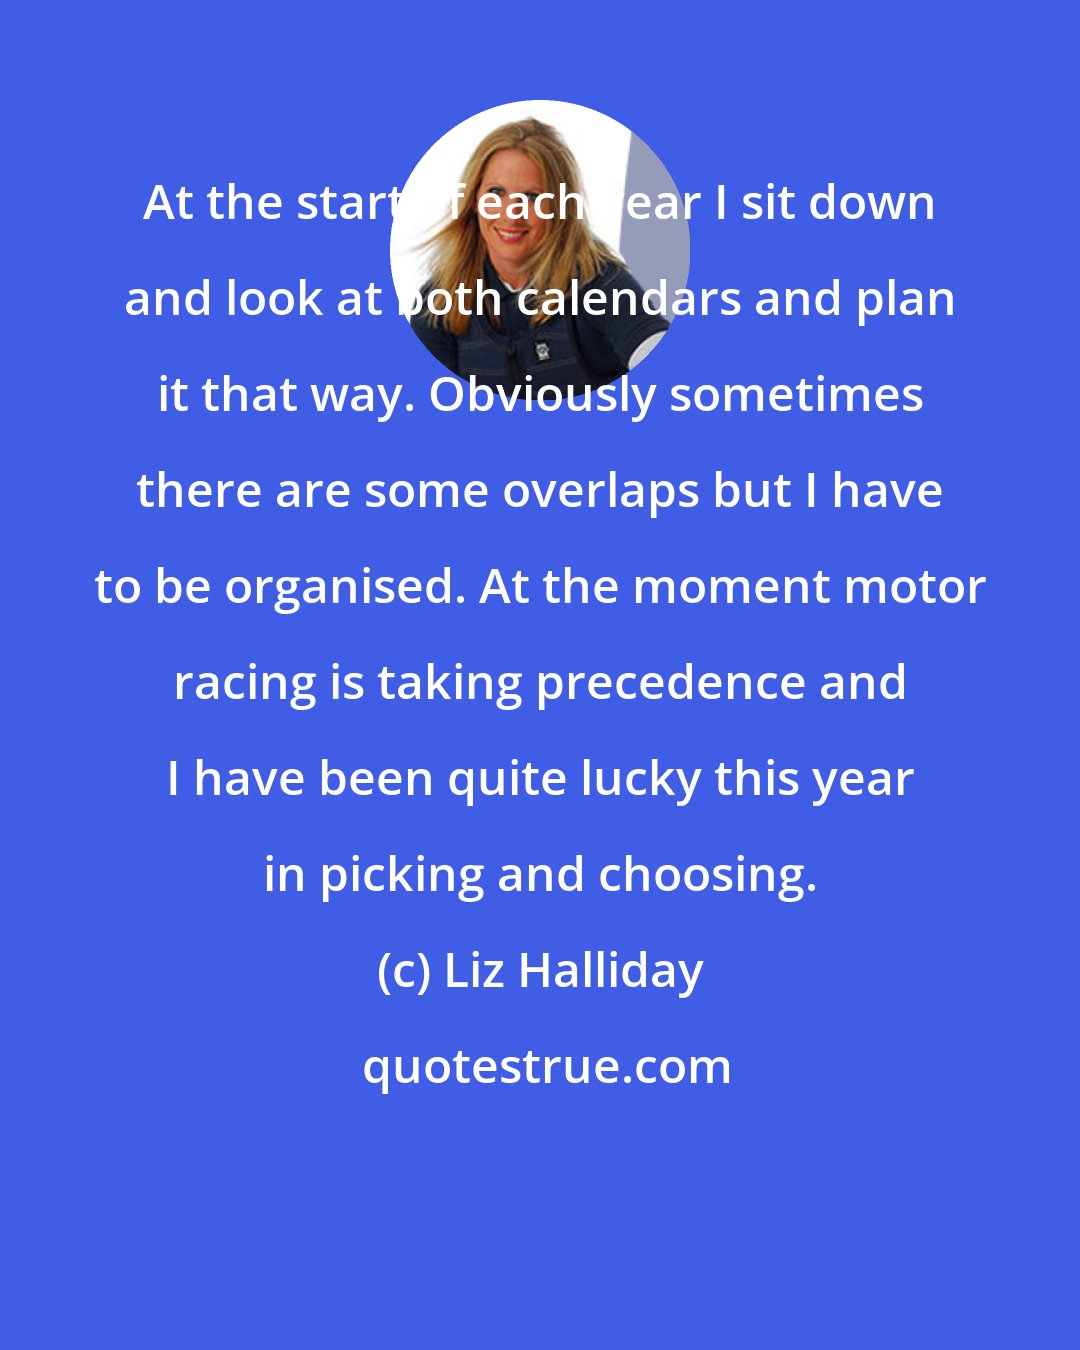 Liz Halliday: At the start of each year I sit down and look at both calendars and plan it that way. Obviously sometimes there are some overlaps but I have to be organised. At the moment motor racing is taking precedence and I have been quite lucky this year in picking and choosing.